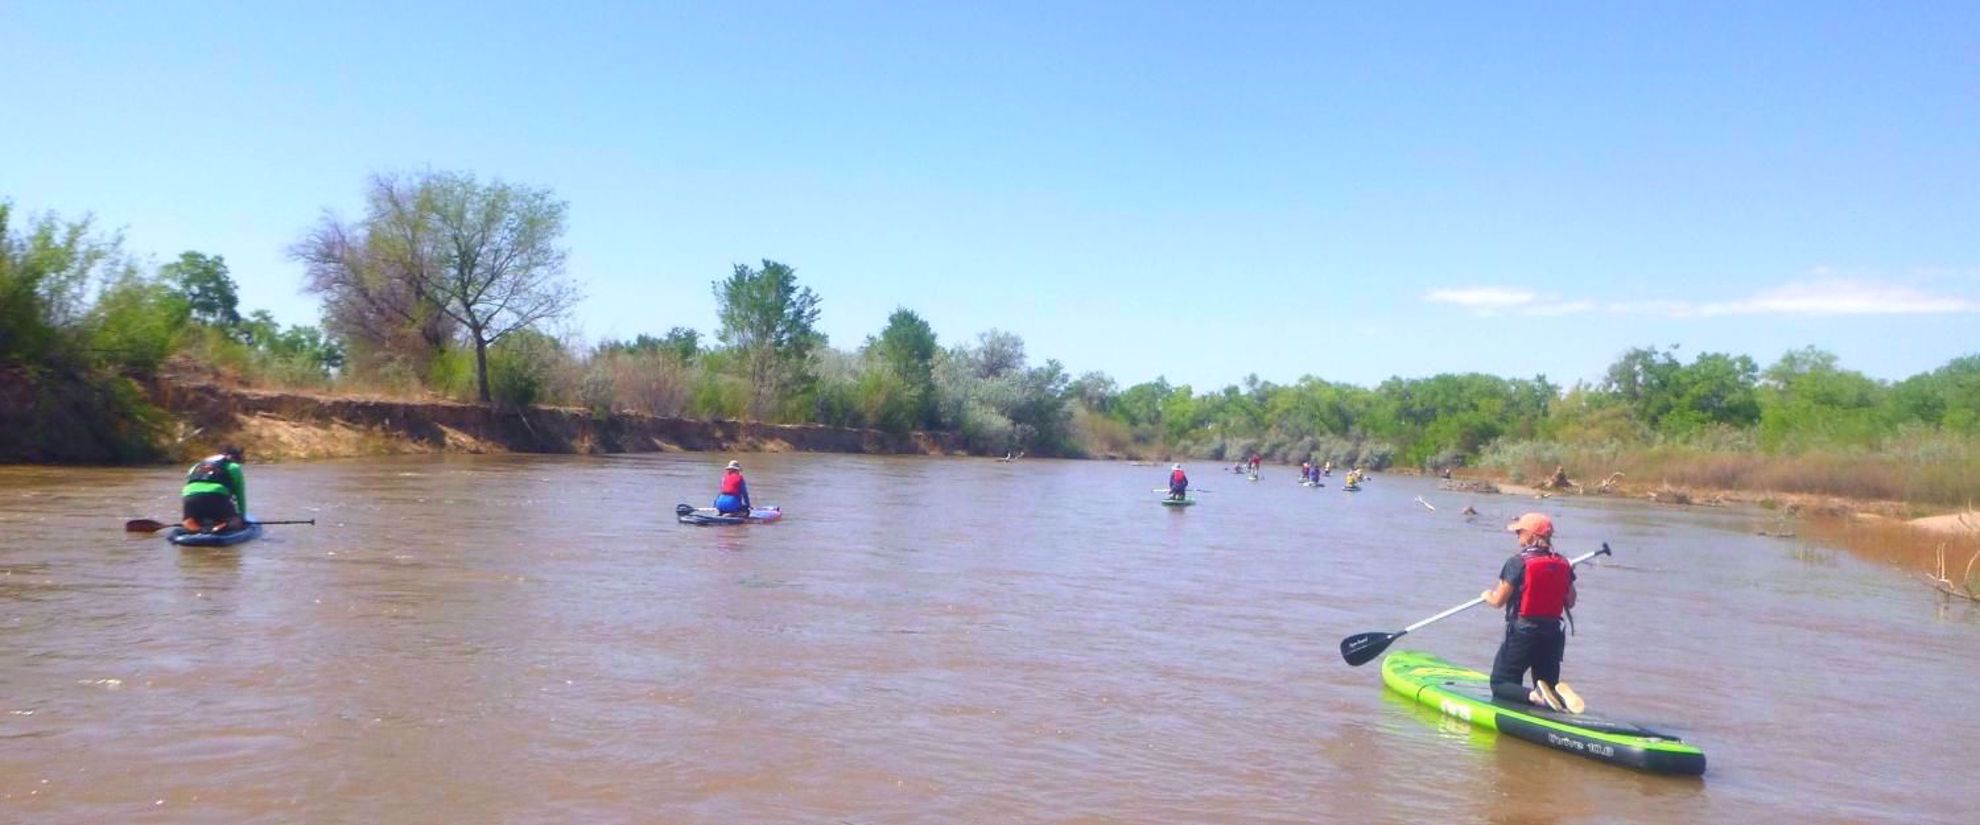 stand up paddle boarding on the rio grande river